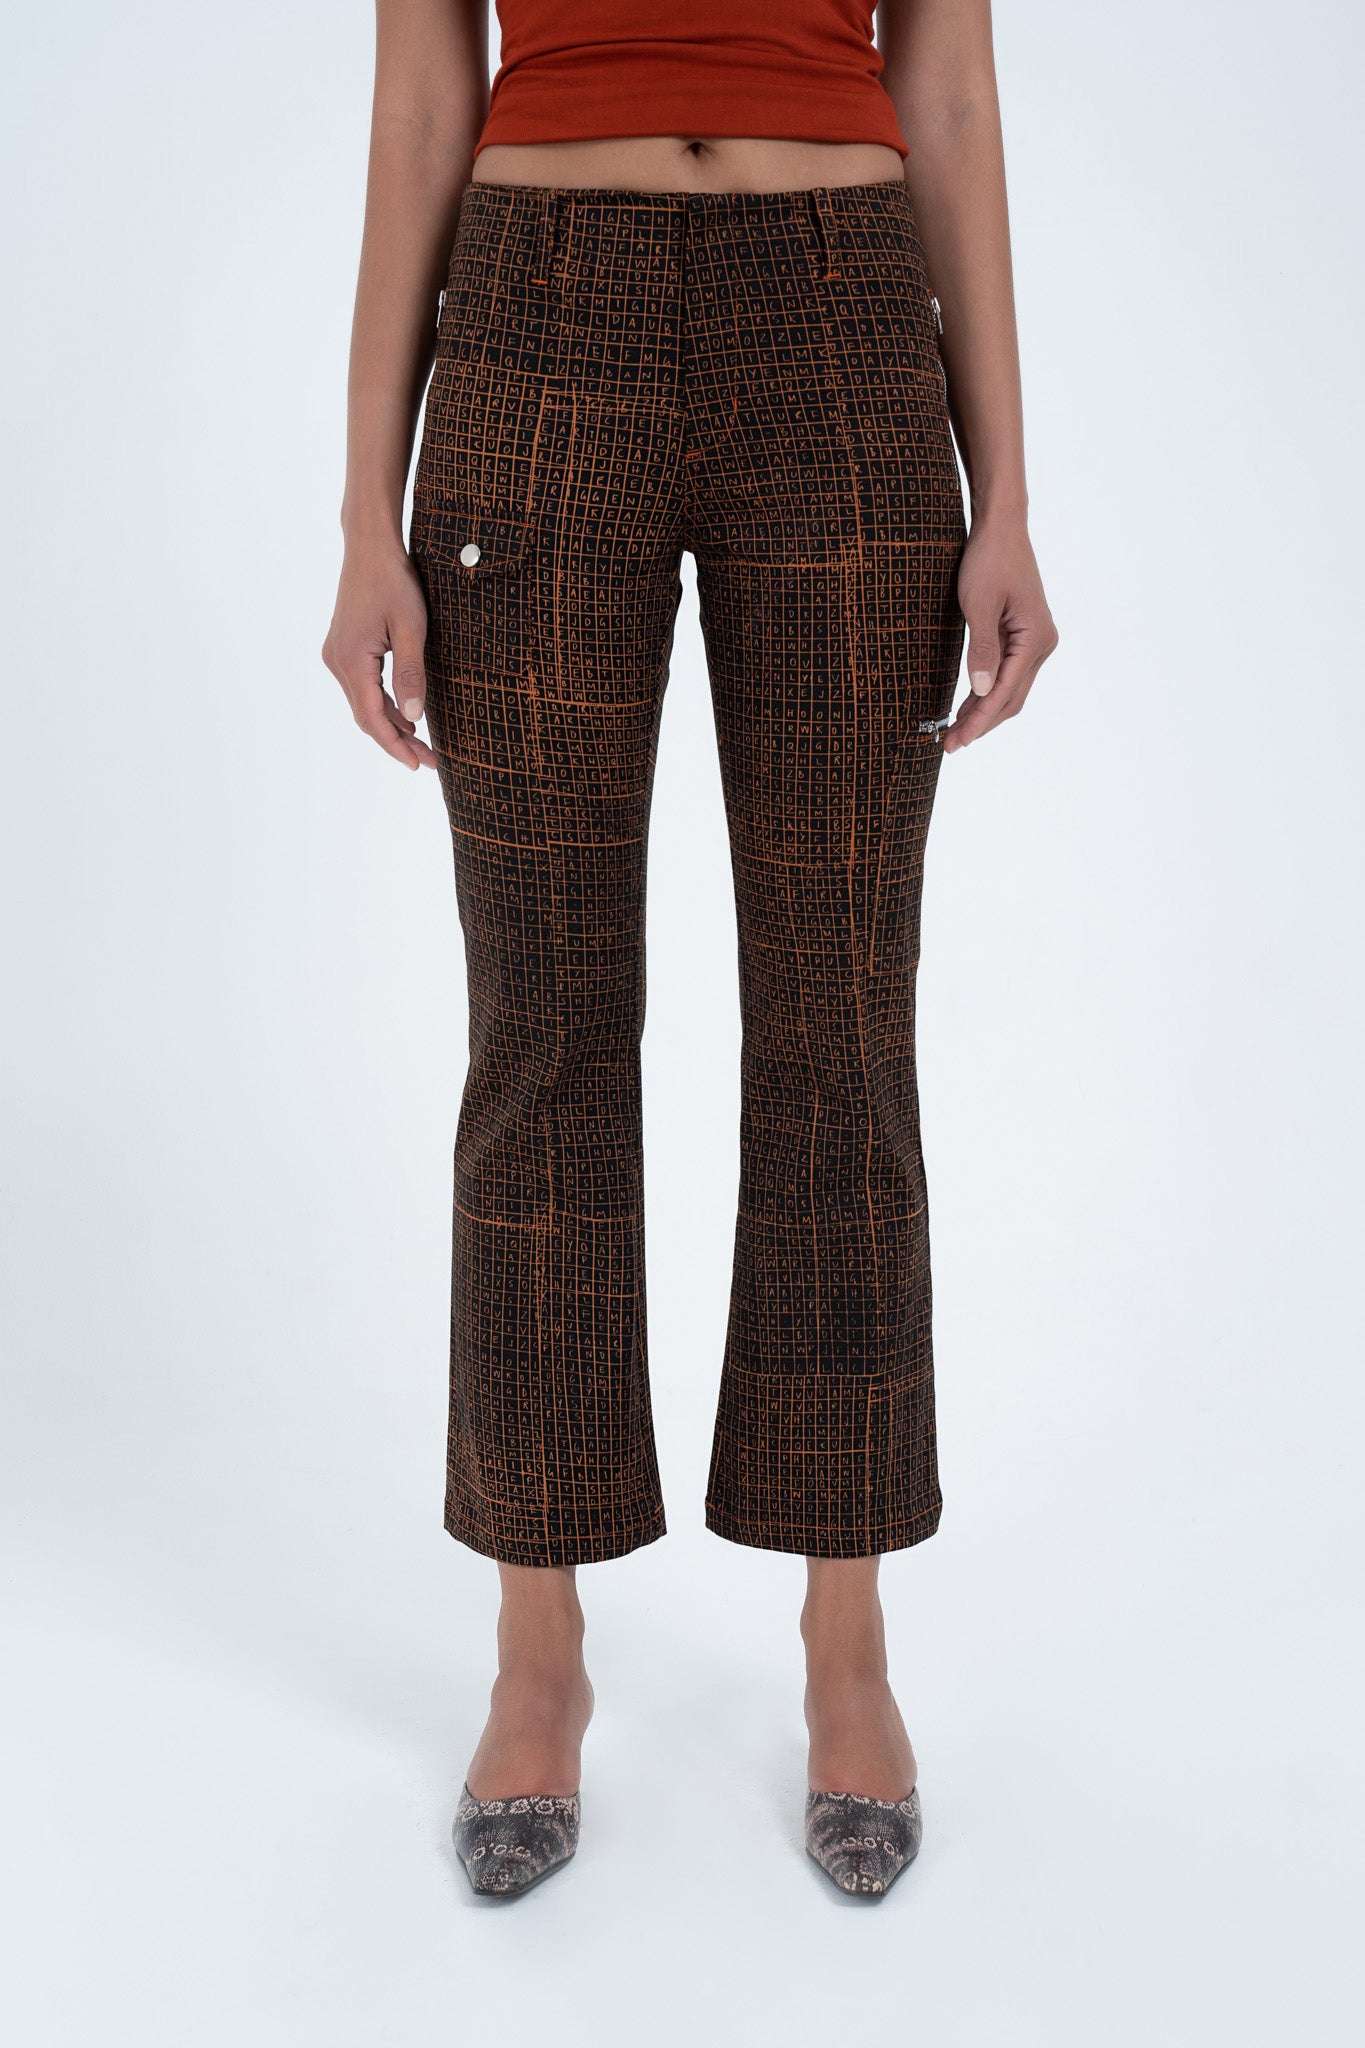 Flared Utility Pant in Find-A-Word